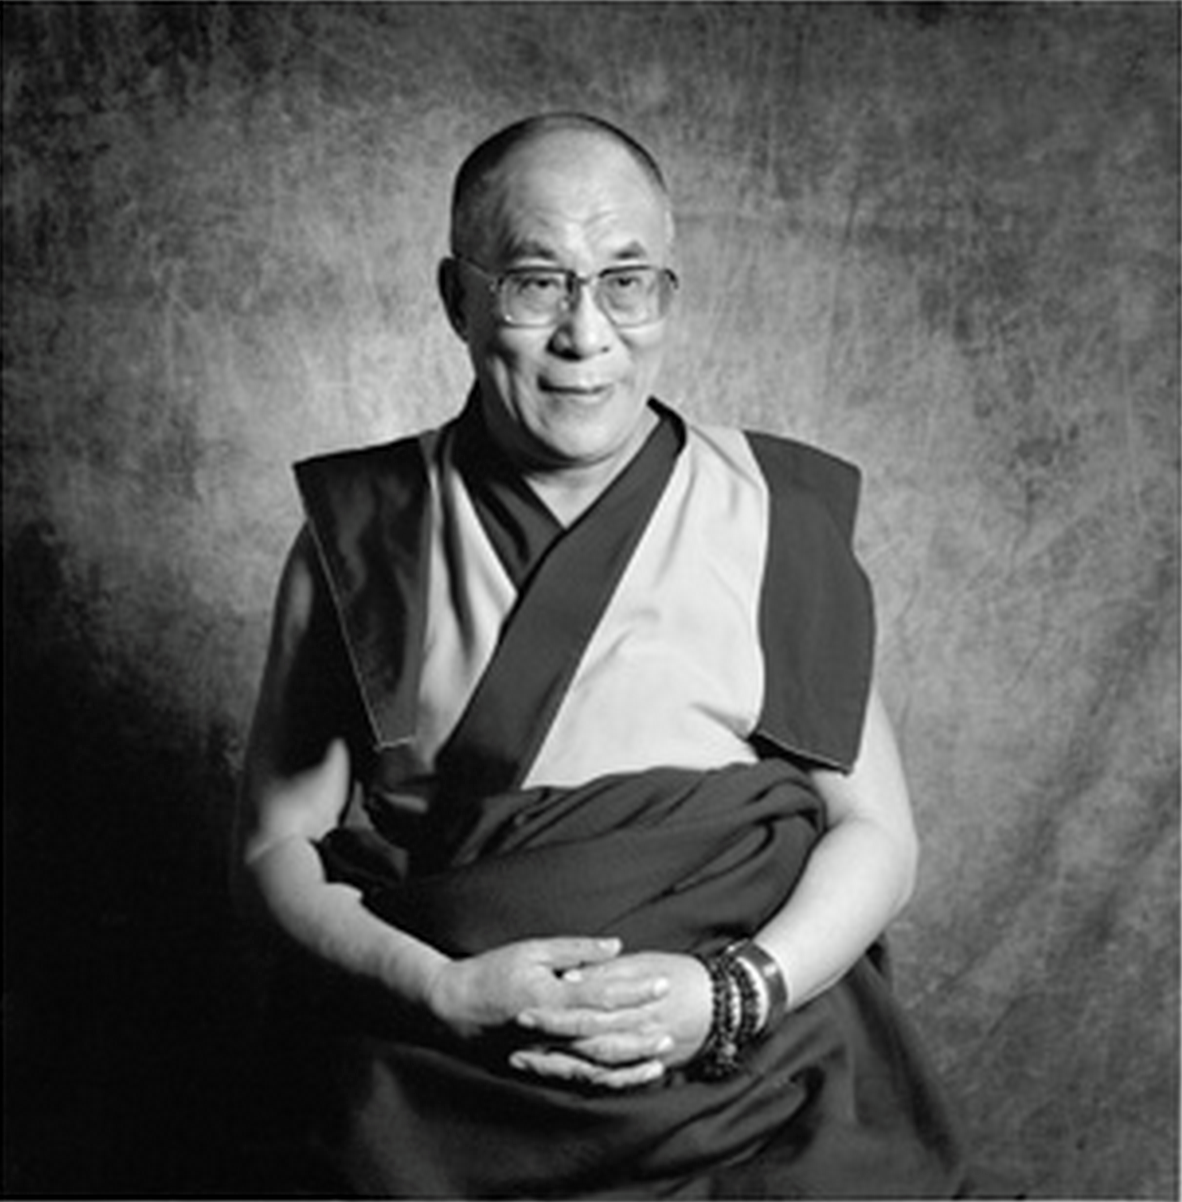 His Holiness the Dalai Lama: I began to advise people about Dolgyal, making clear that how they responded was up to them. I did not insist on what others might do. Many Tibetans and Westerners understood the history of the practice and stopped doing it. There were several great masters who staunchly opposed the Dolgyal practice in the past (…).